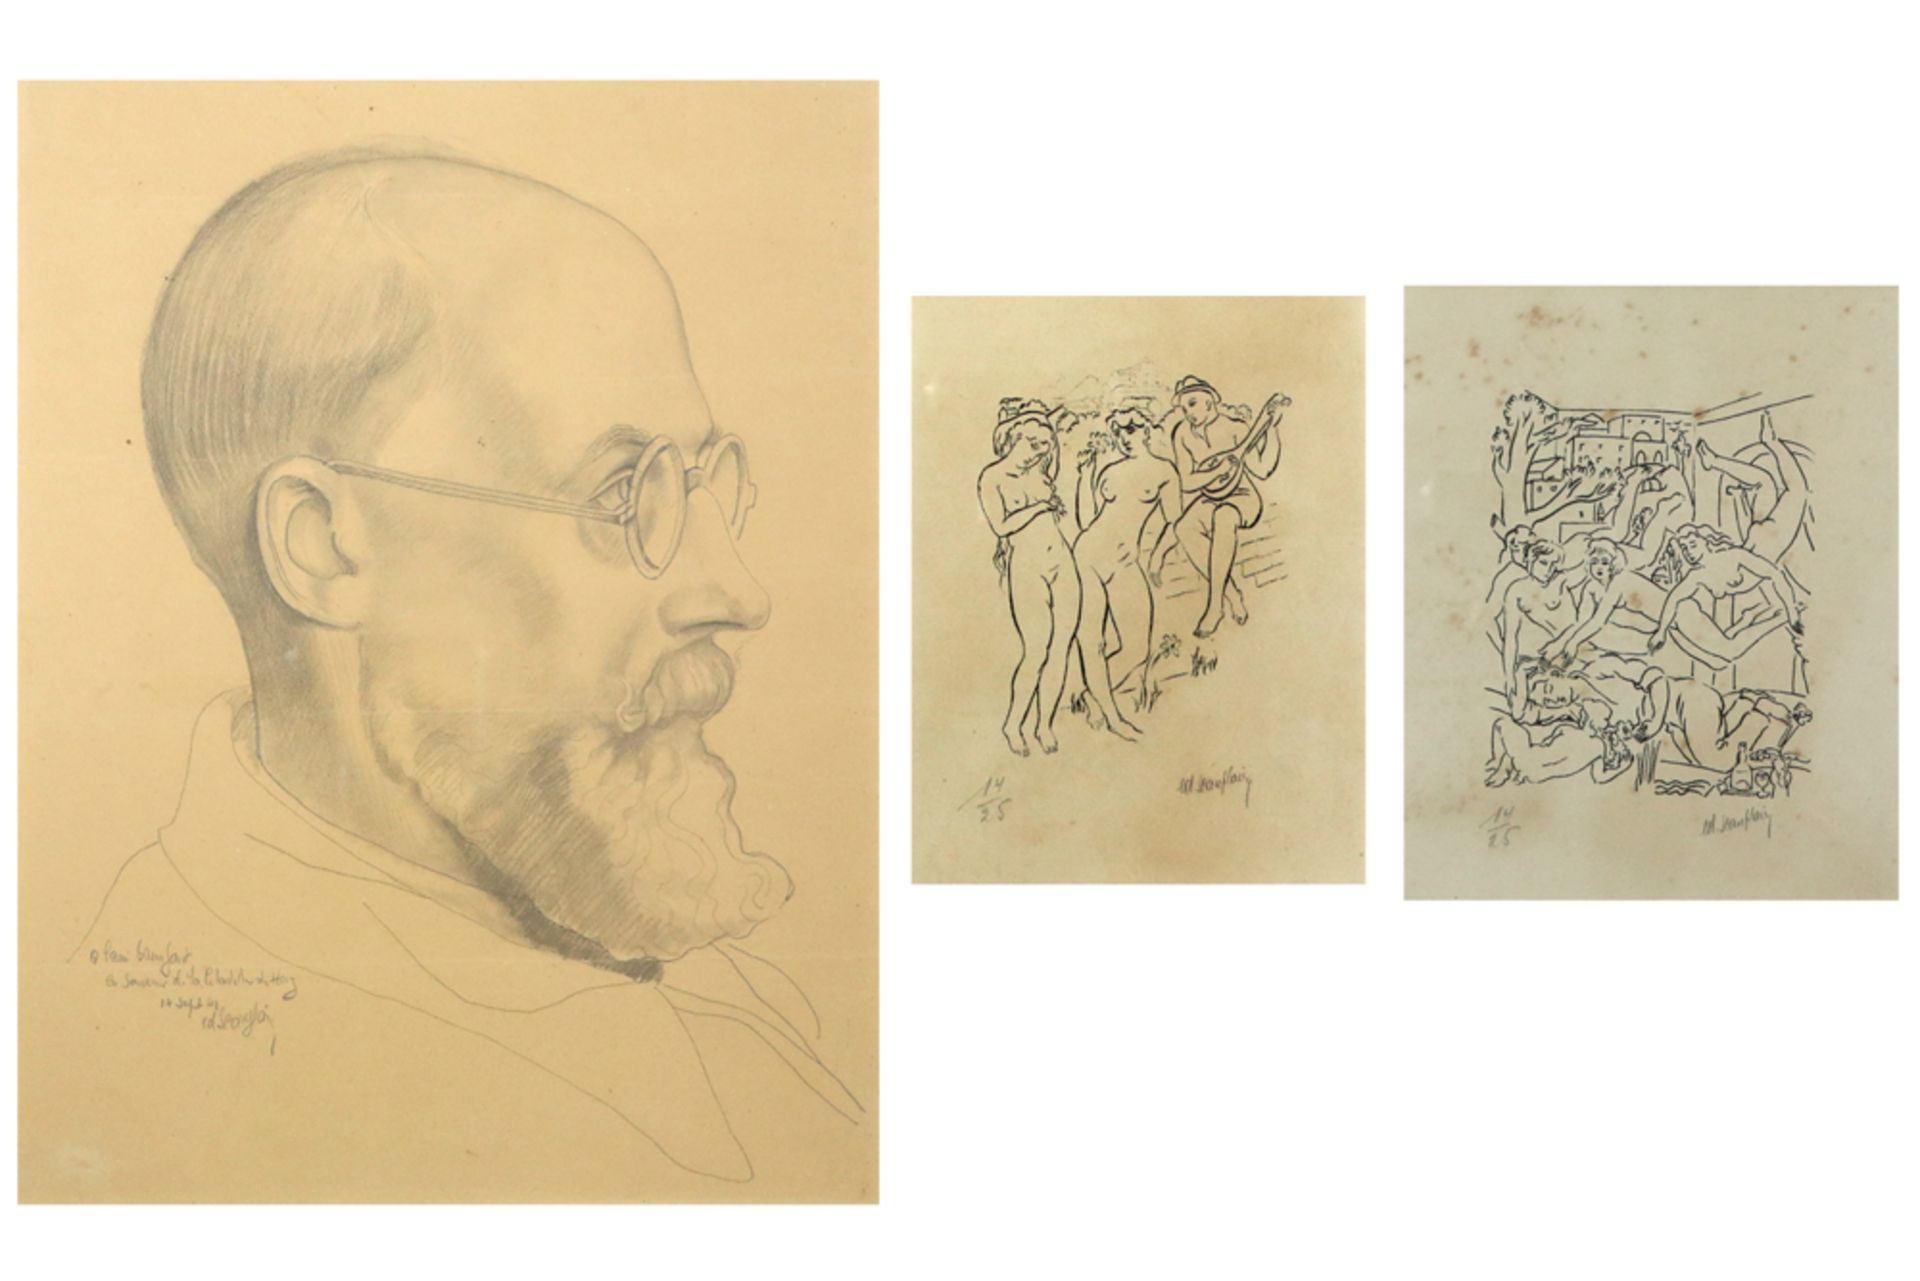 drawing with male portrait and two lithographs each with naked women - signed Edgar Scauflaire ||